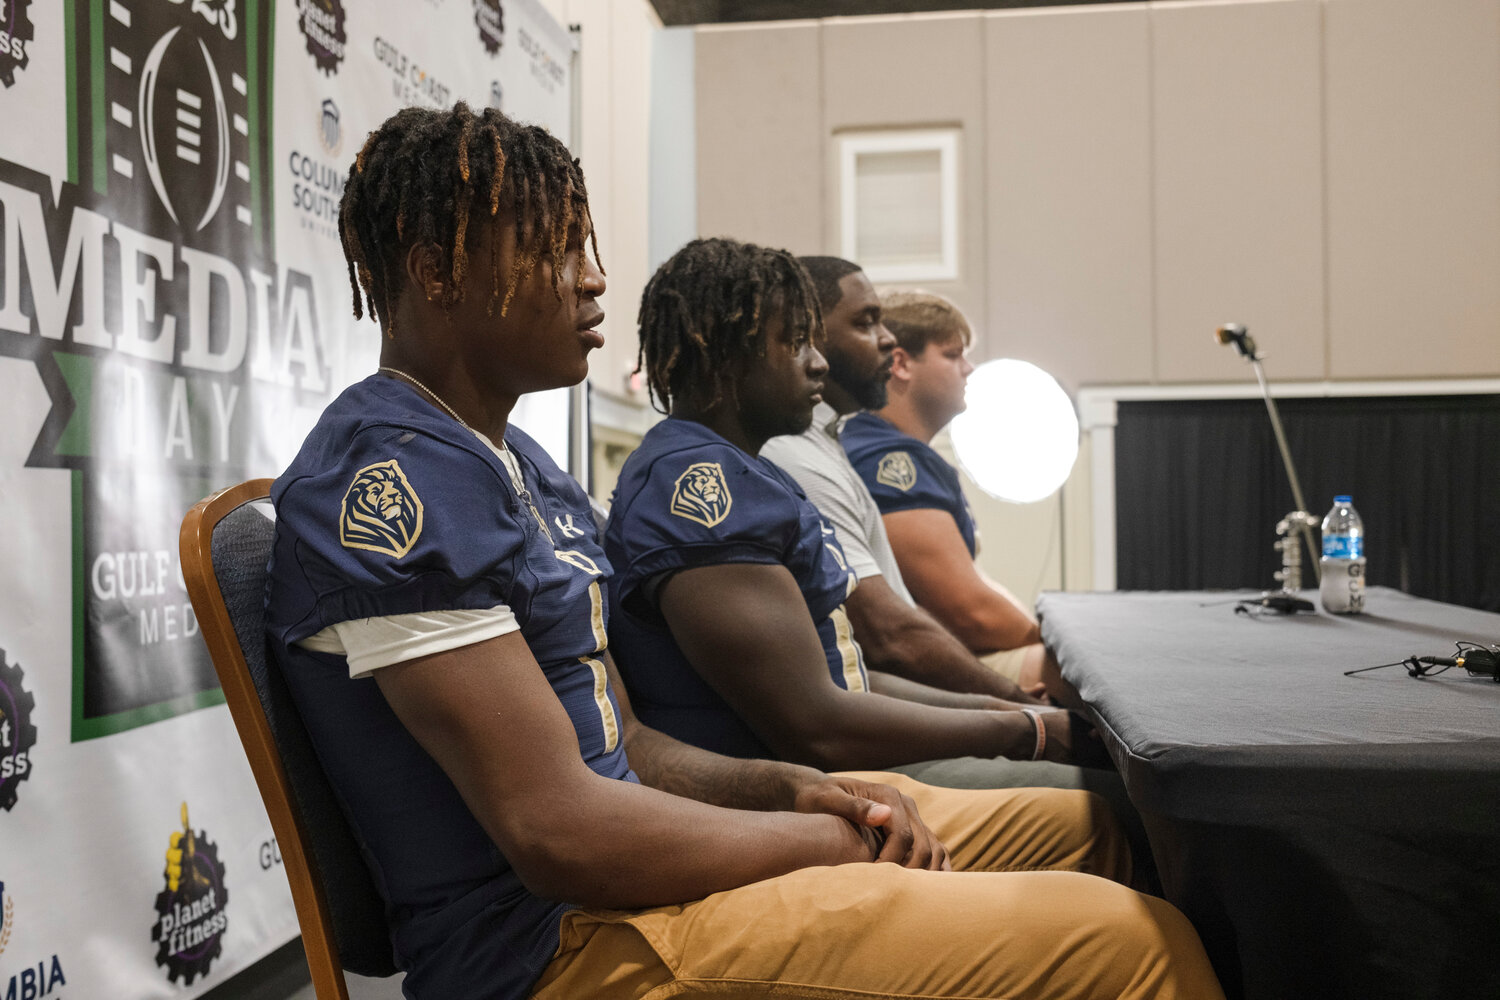 The Foley Lions were represented by Perry Thompson, Kolton Nero, head coach Deric Scott and Logan Joellenbeck at the second-annual Gulf Coast Media Day presented by Columbia Southern and Planet Fitness hosted at the Orange Beach Event Center on Thursday.